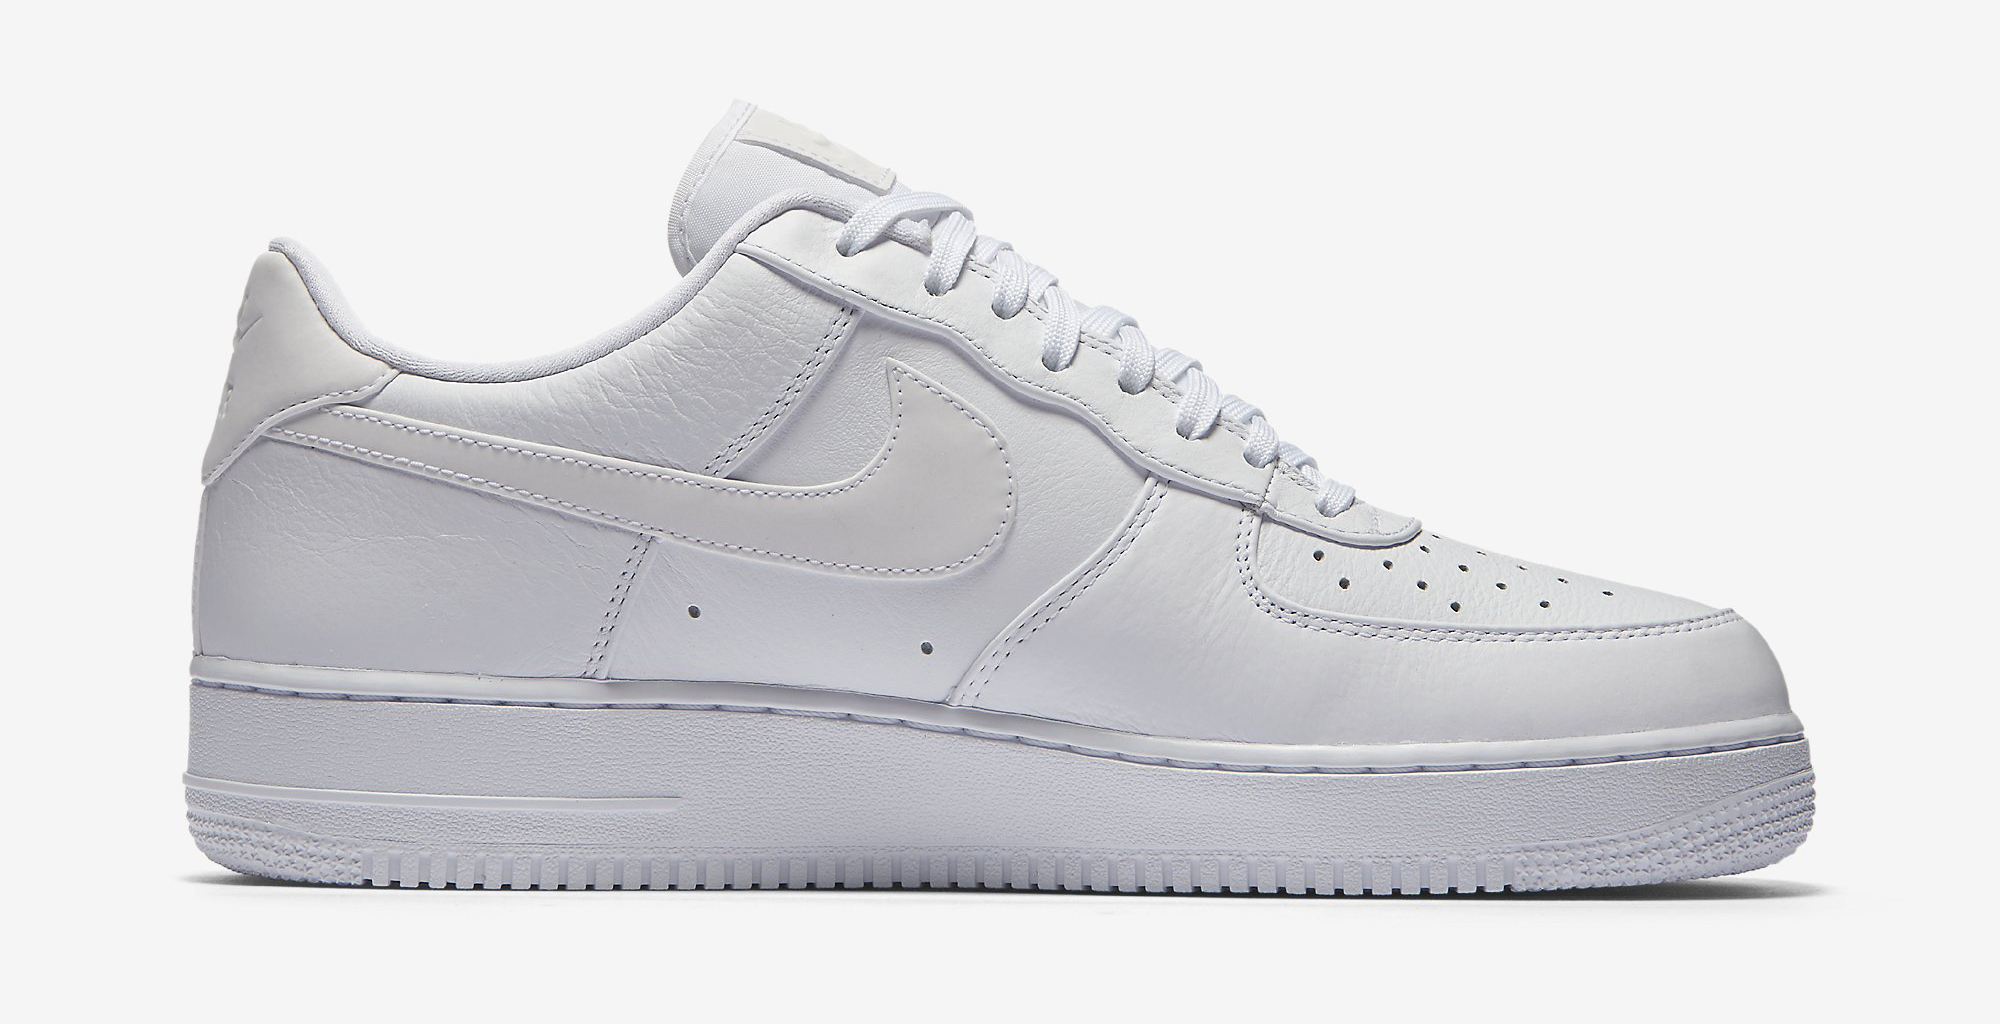 Nike Air Force 1 White Reflective 905345 100 Medial